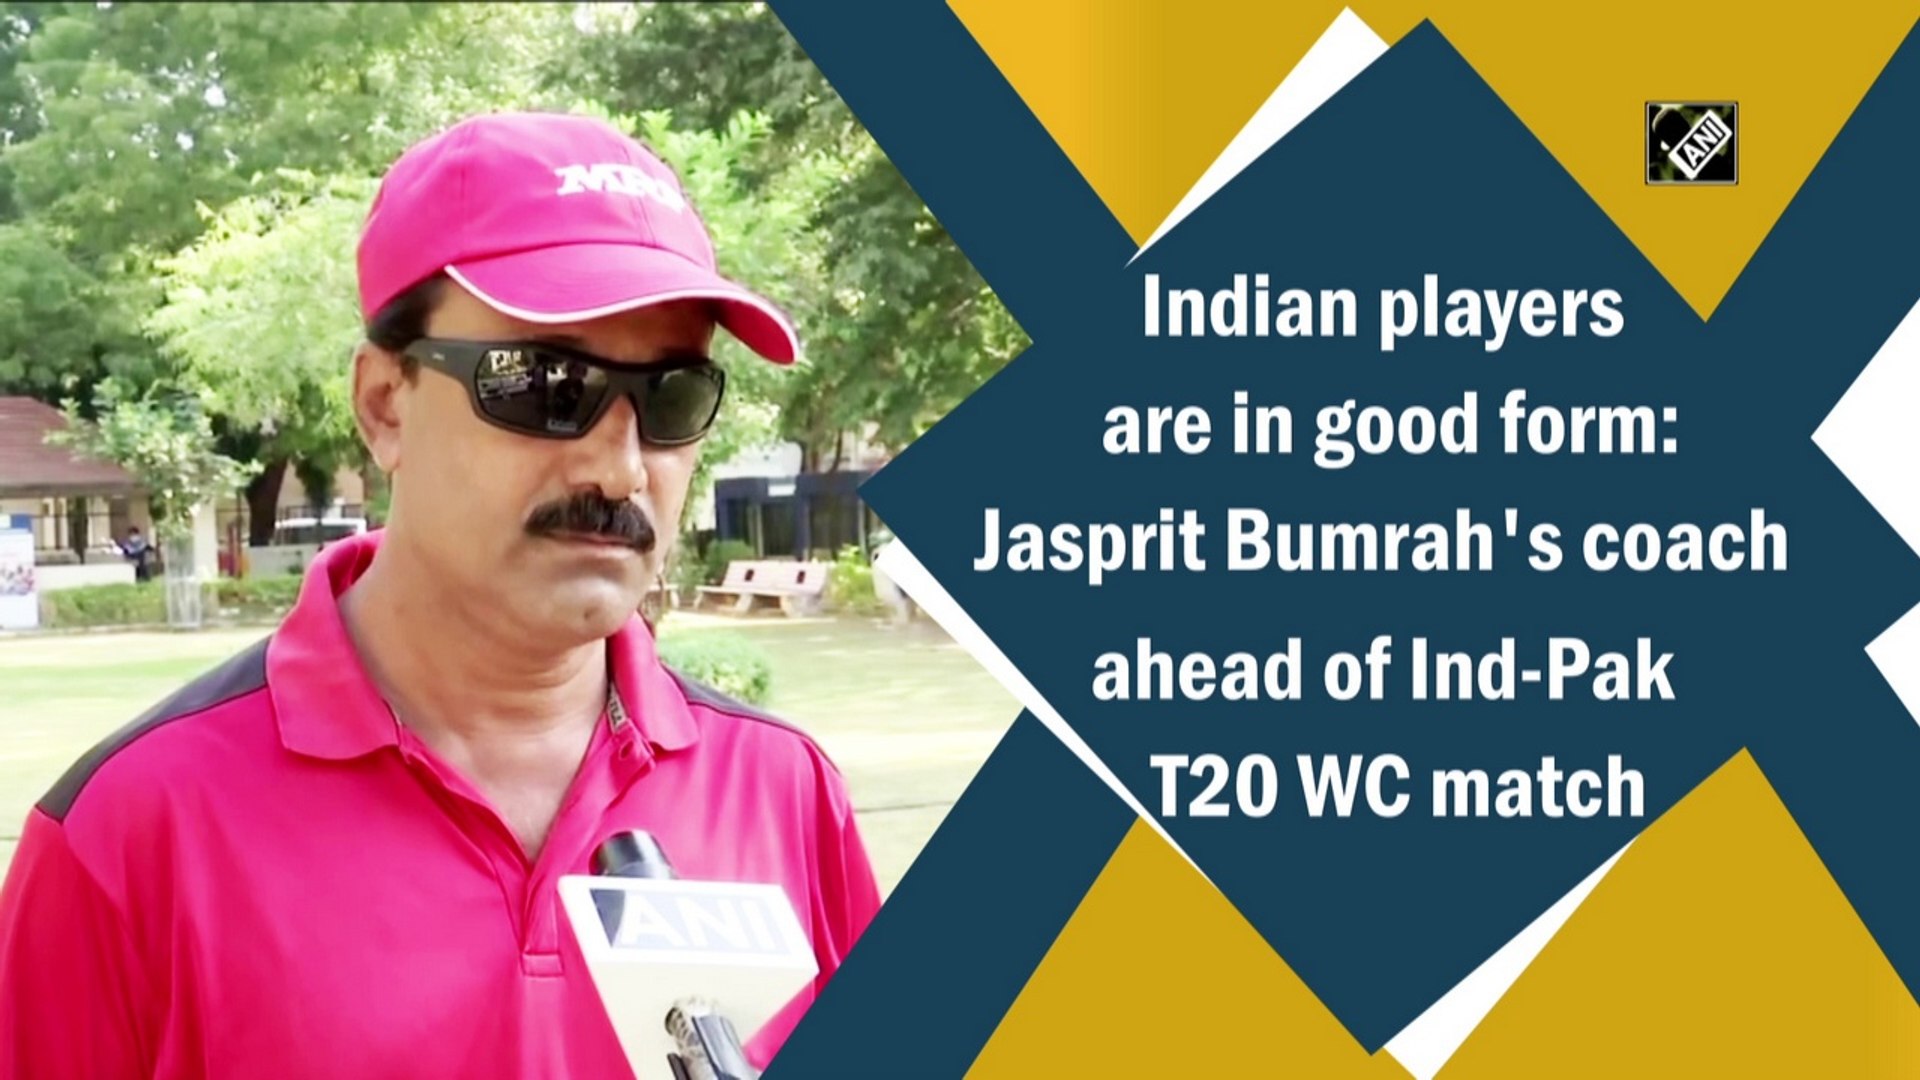 Indian players are in good form: Jasprit Bumrah's coach ahead of Ind-Pak T20 WC match